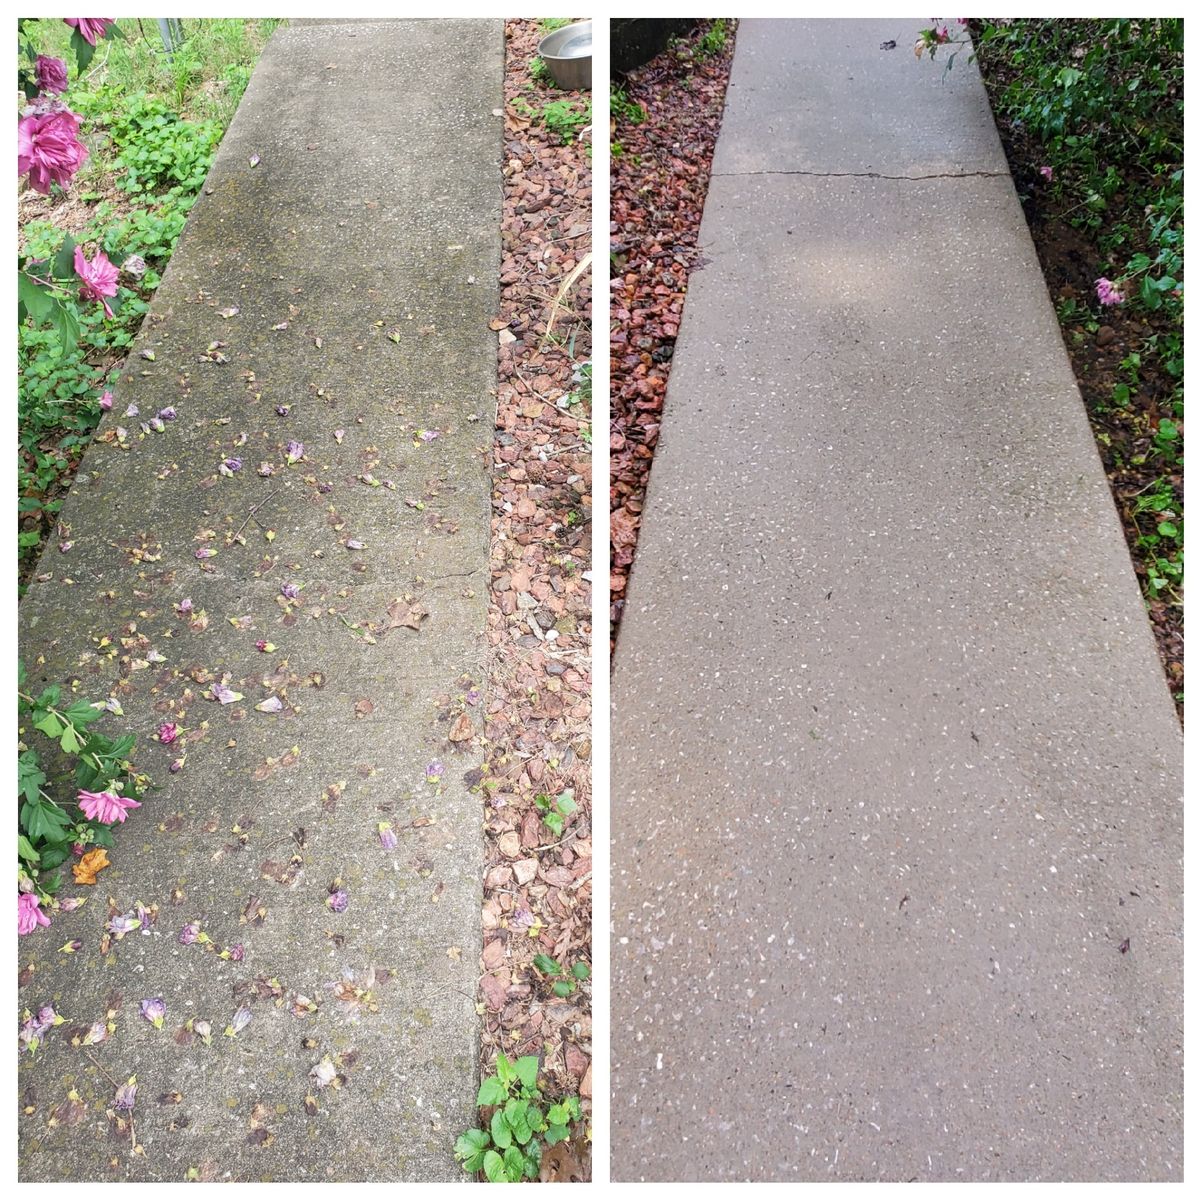 Concrete Cleaning for Shoals Pressure Washing in North Alabama, 